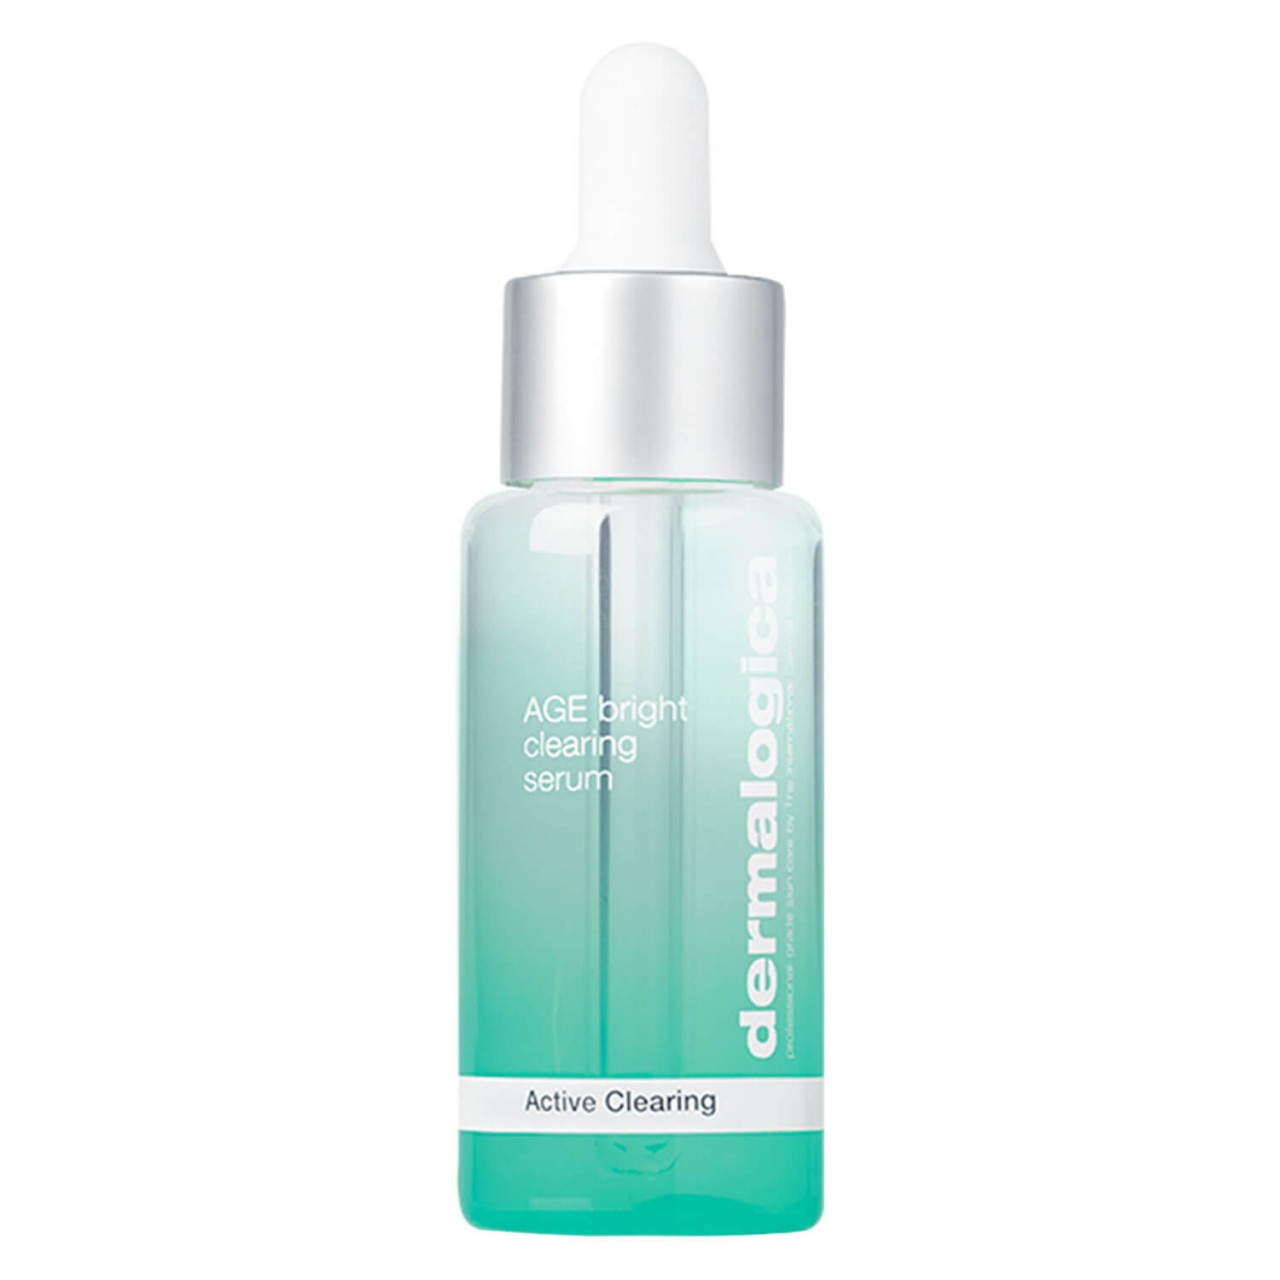 Active Clearing - AGE Bright Clearing Serum von Dermalogica